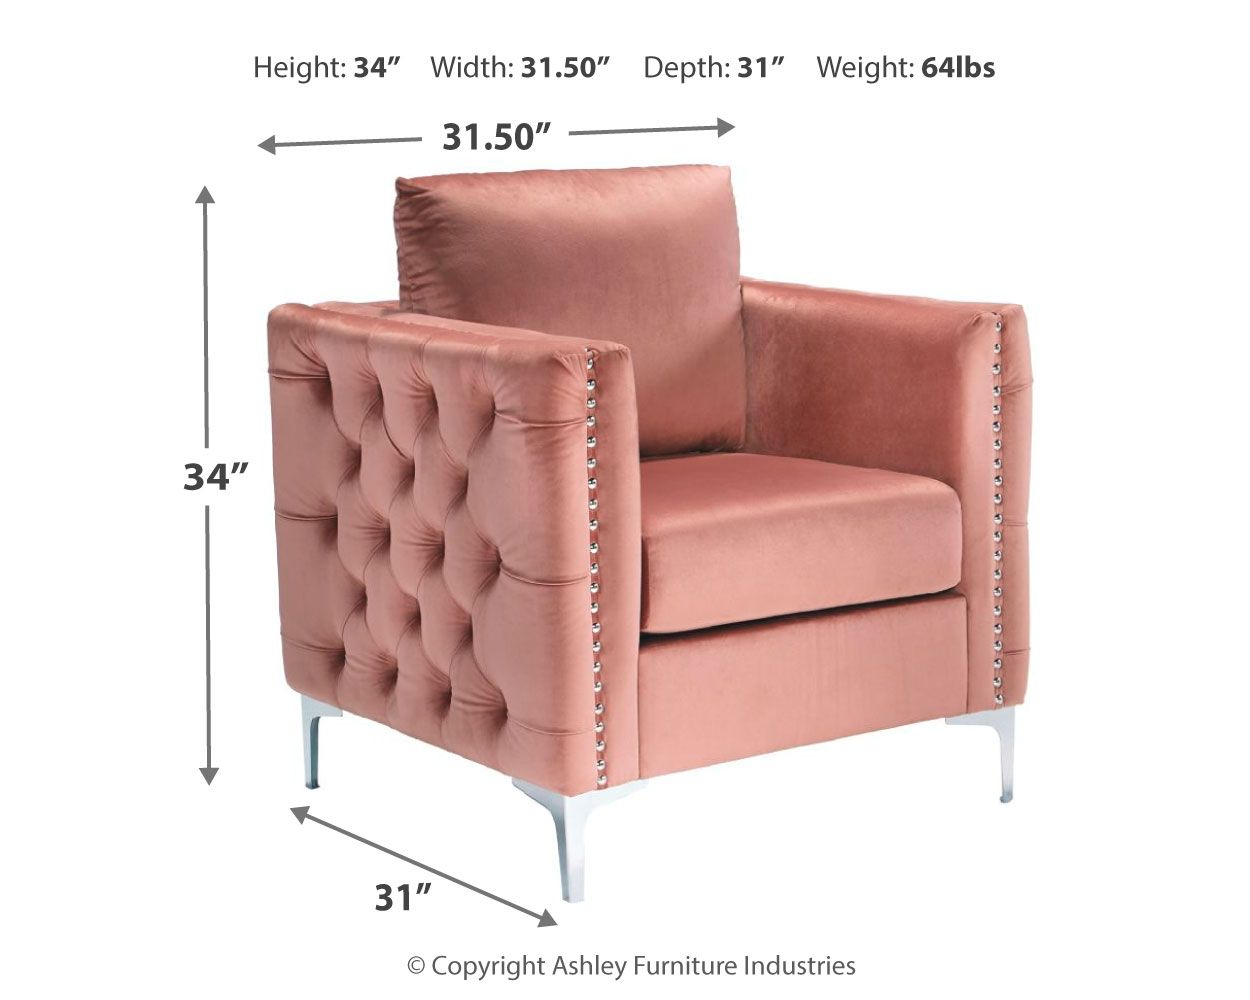 Lizmont - Blush Pink - Accent Chair - Tony's Home Furnishings